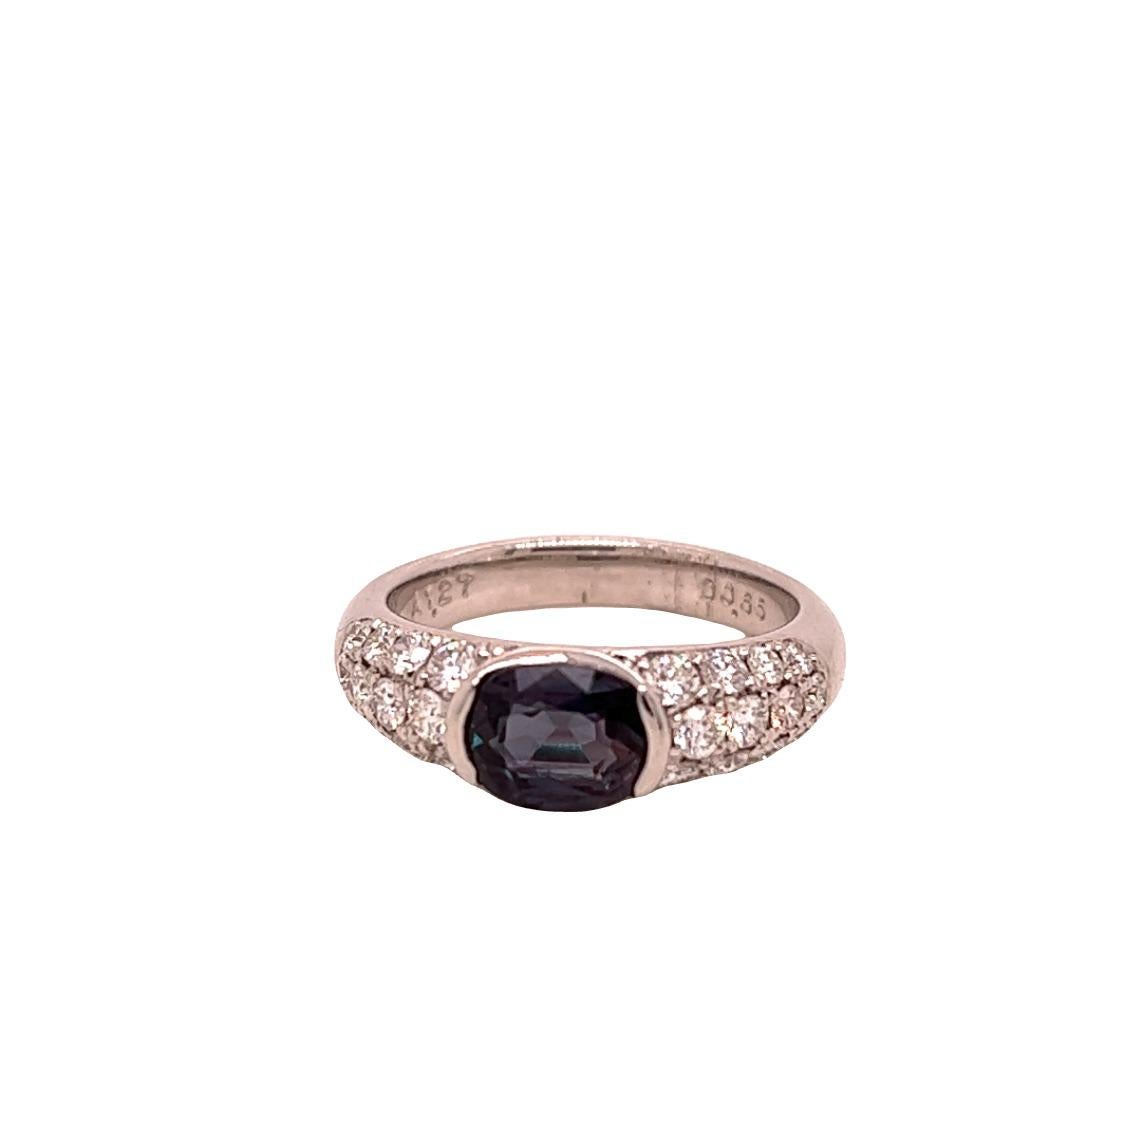 This is a gorgeous natural AAA quality oval Alexandrite surrounded by dainty diamonds that is set in a vintage platinum setting. This ring features a natural 1.27 carat oval alexandrite that is certified by the Gemological Institute of America (GIA)